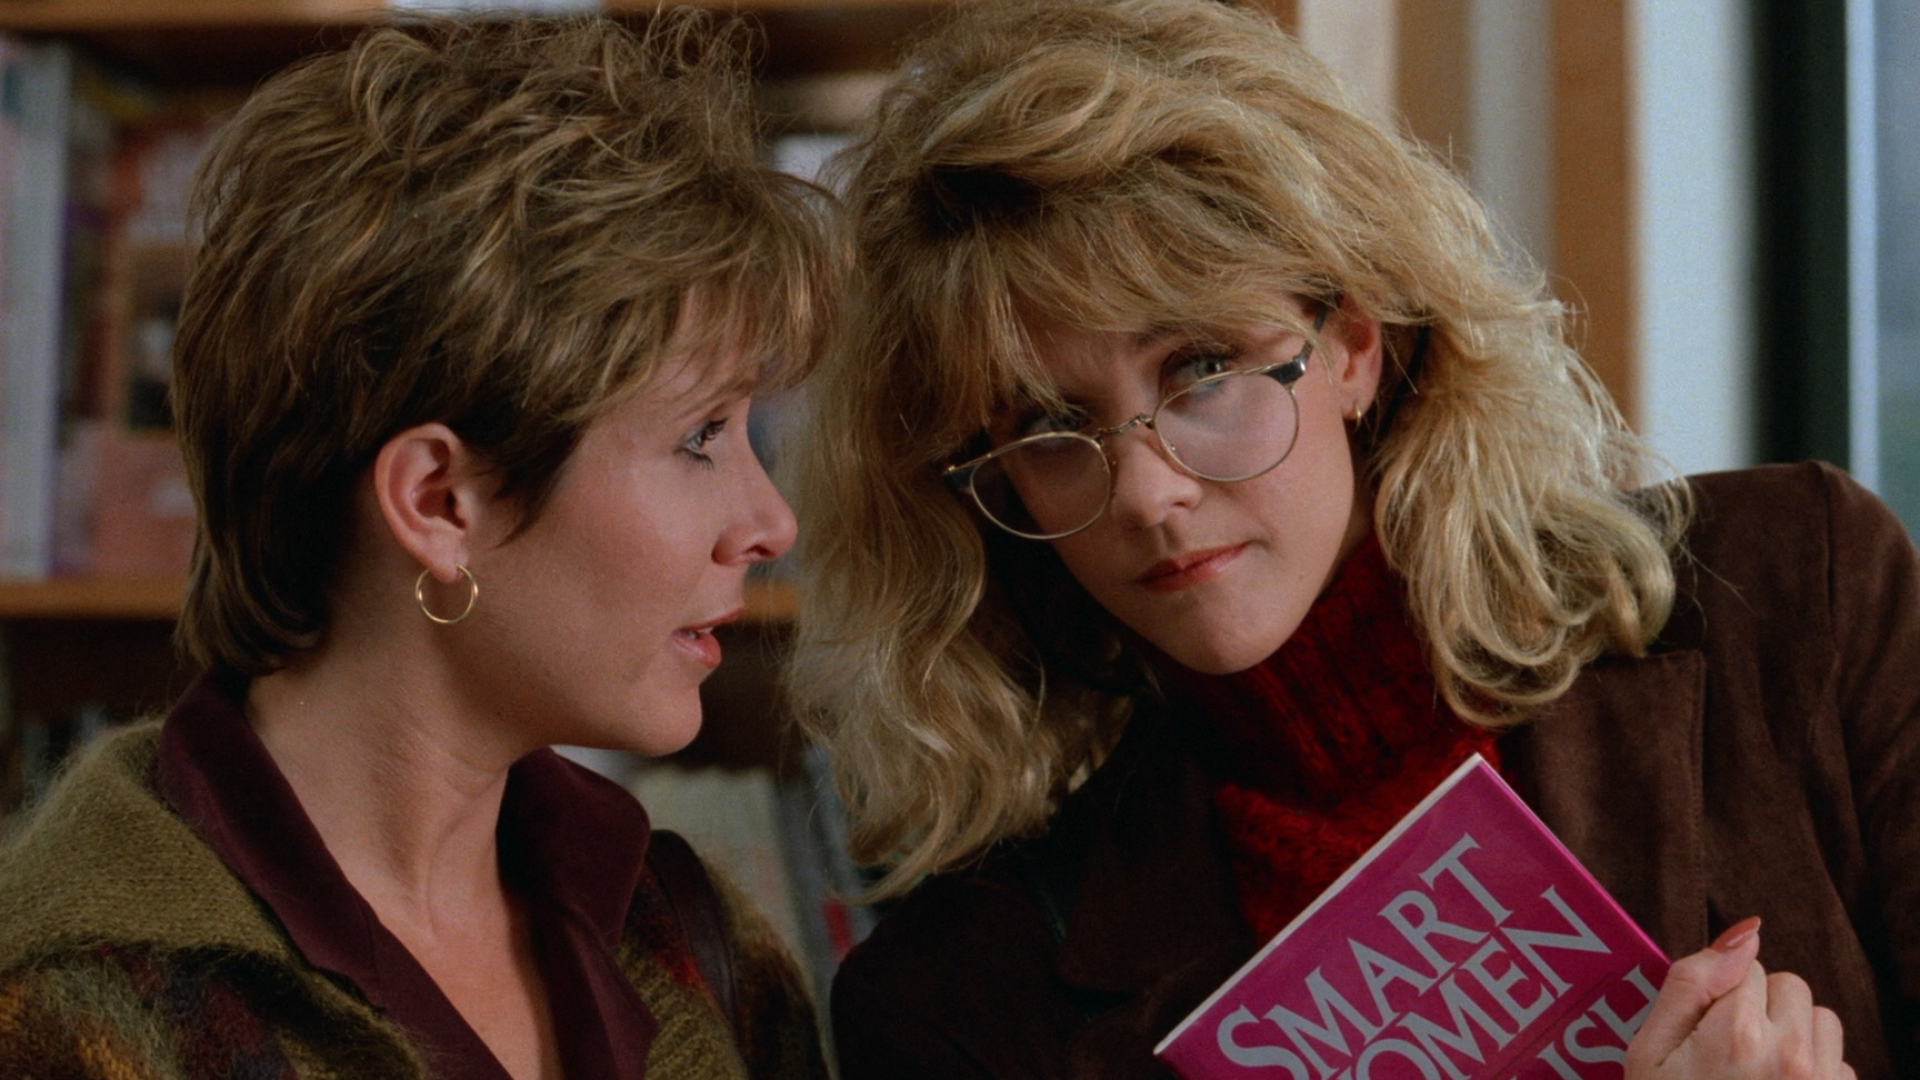 When Harry Met Sally: Carrie Fisher as Marie, An American actress and writer. 1920x1080 Full HD Wallpaper.